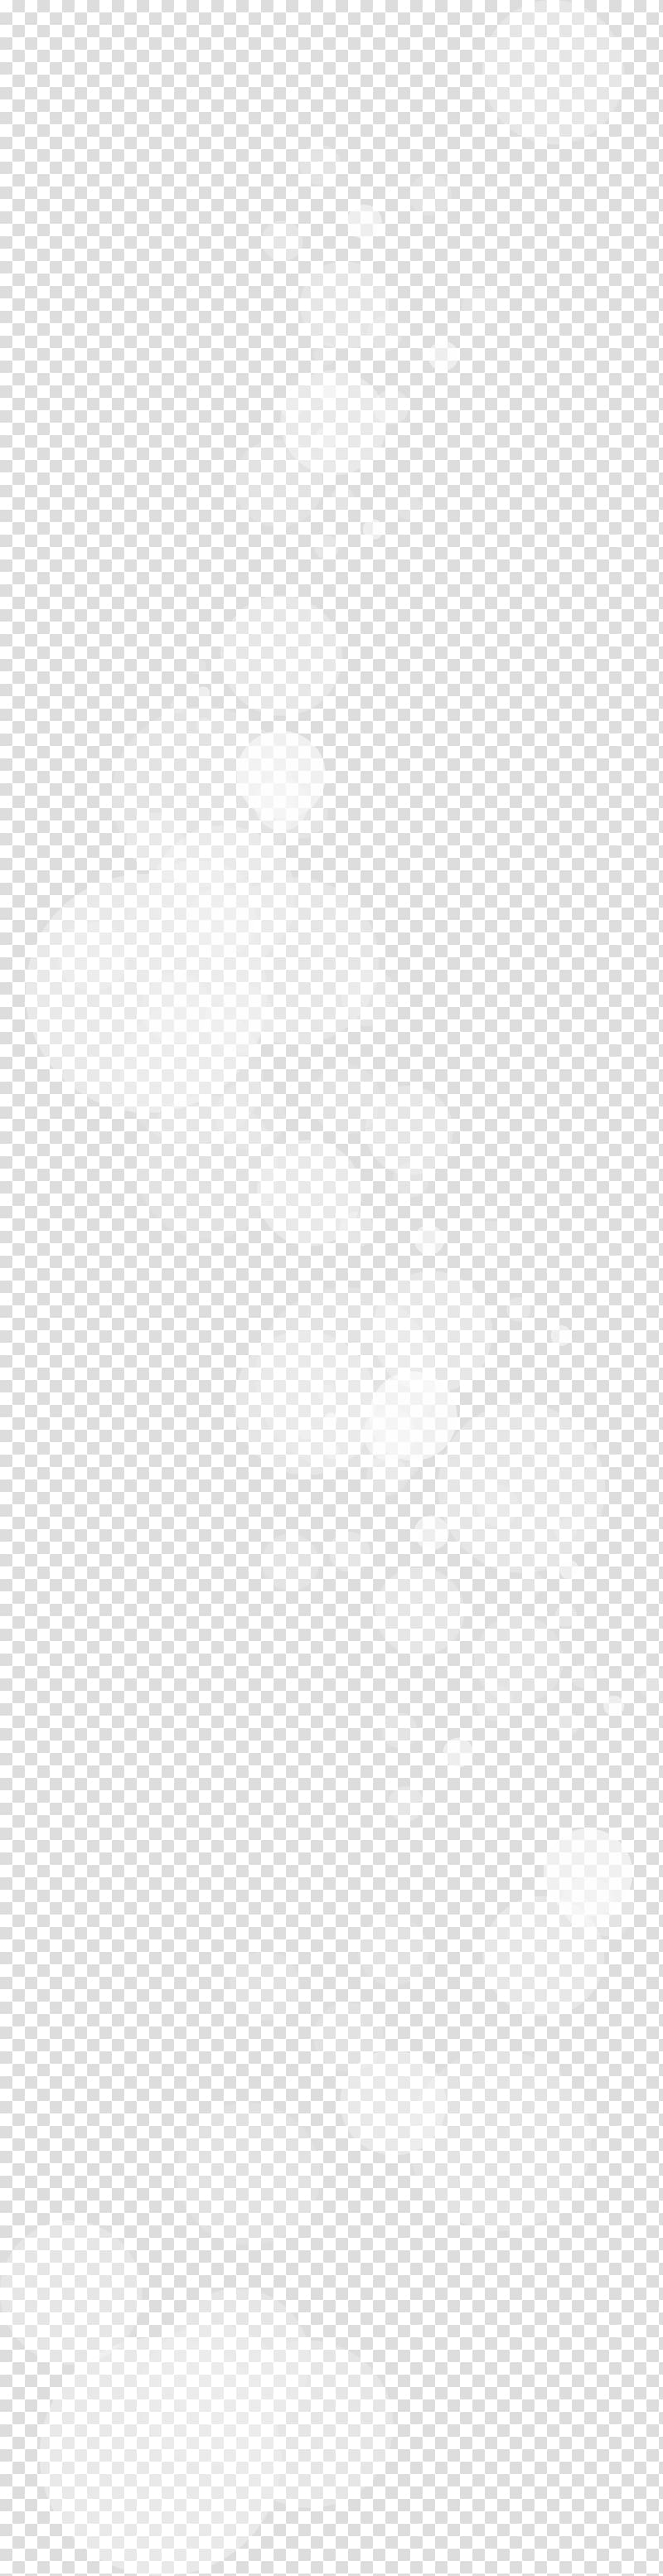 White Black Angle Pattern, White fresh clouds transparent background PNG clipart